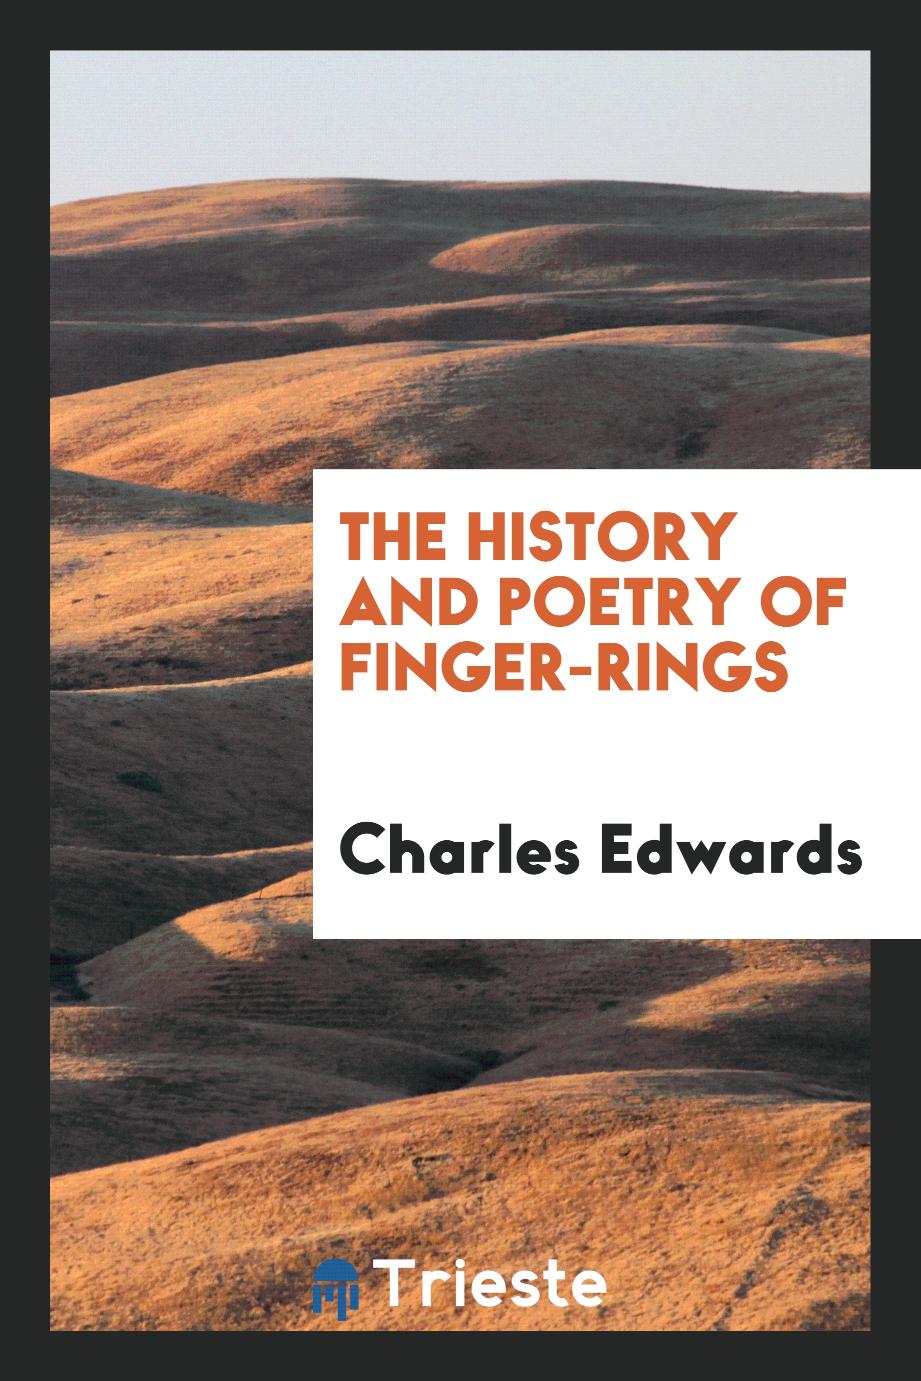 The History and Poetry of Finger-Rings